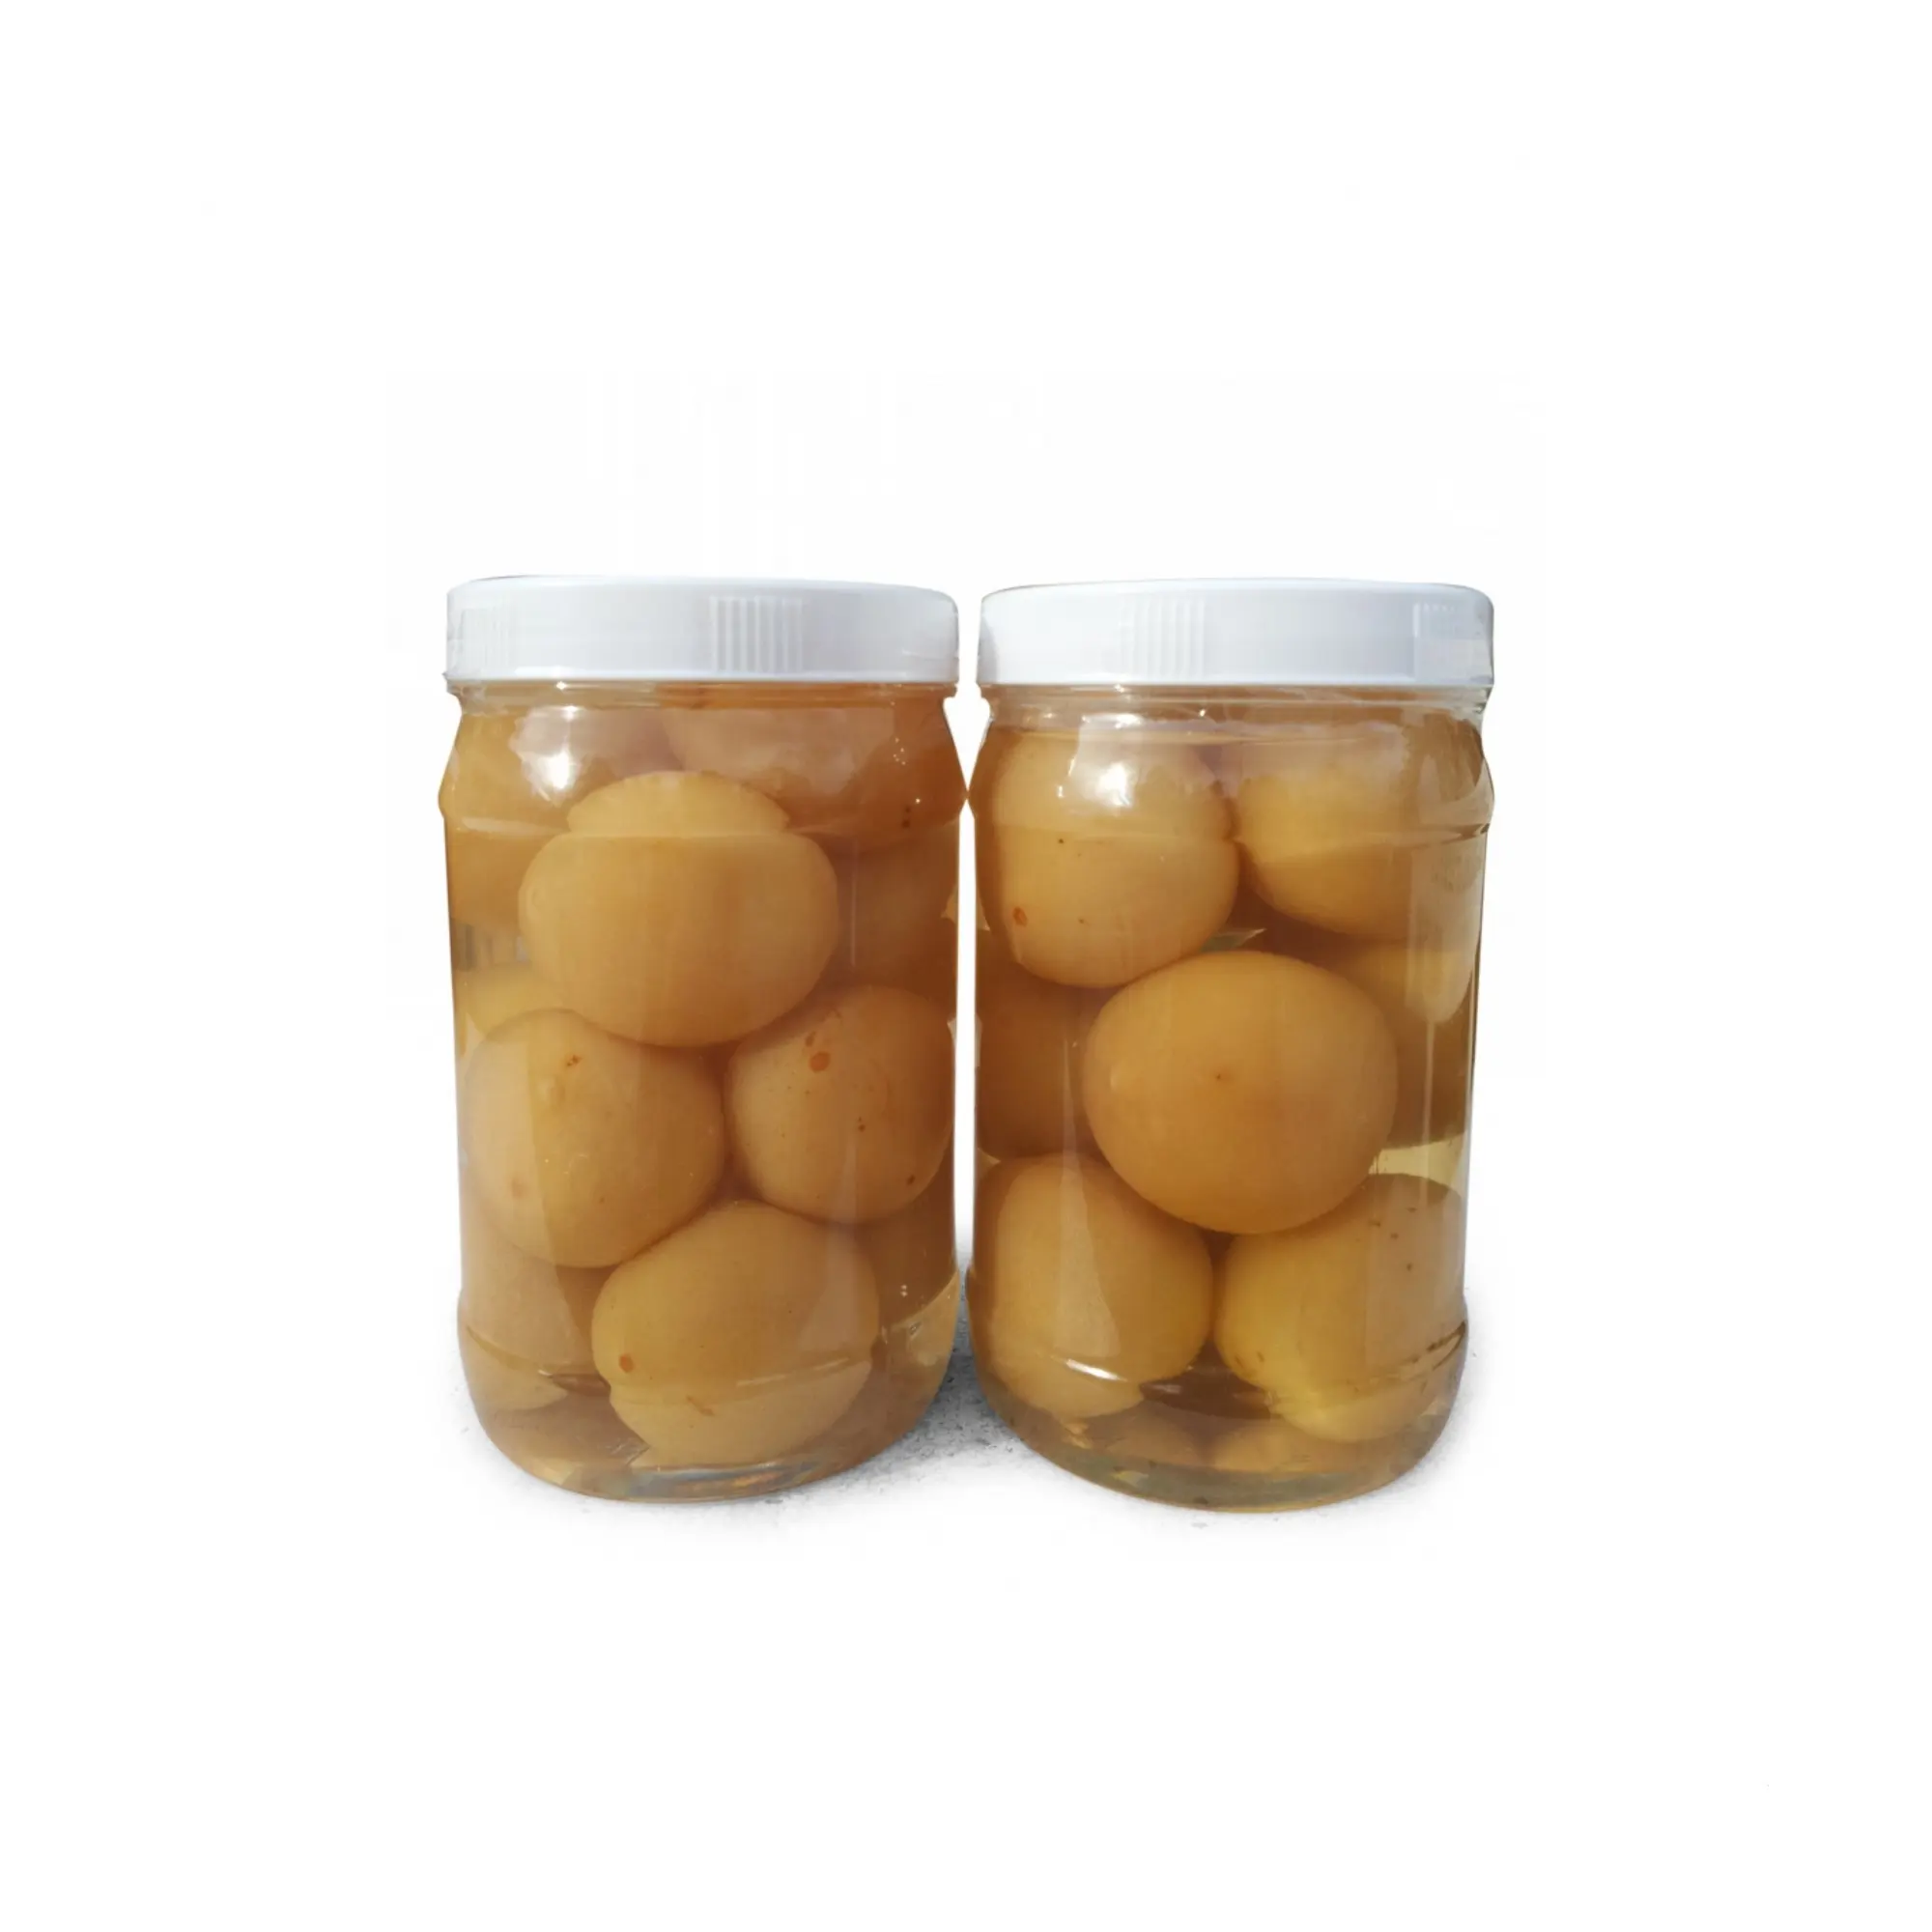 Hot Sale Vietnamese salted and pickled limes or preserved lemons / Pickling lime in plastic or mason jars